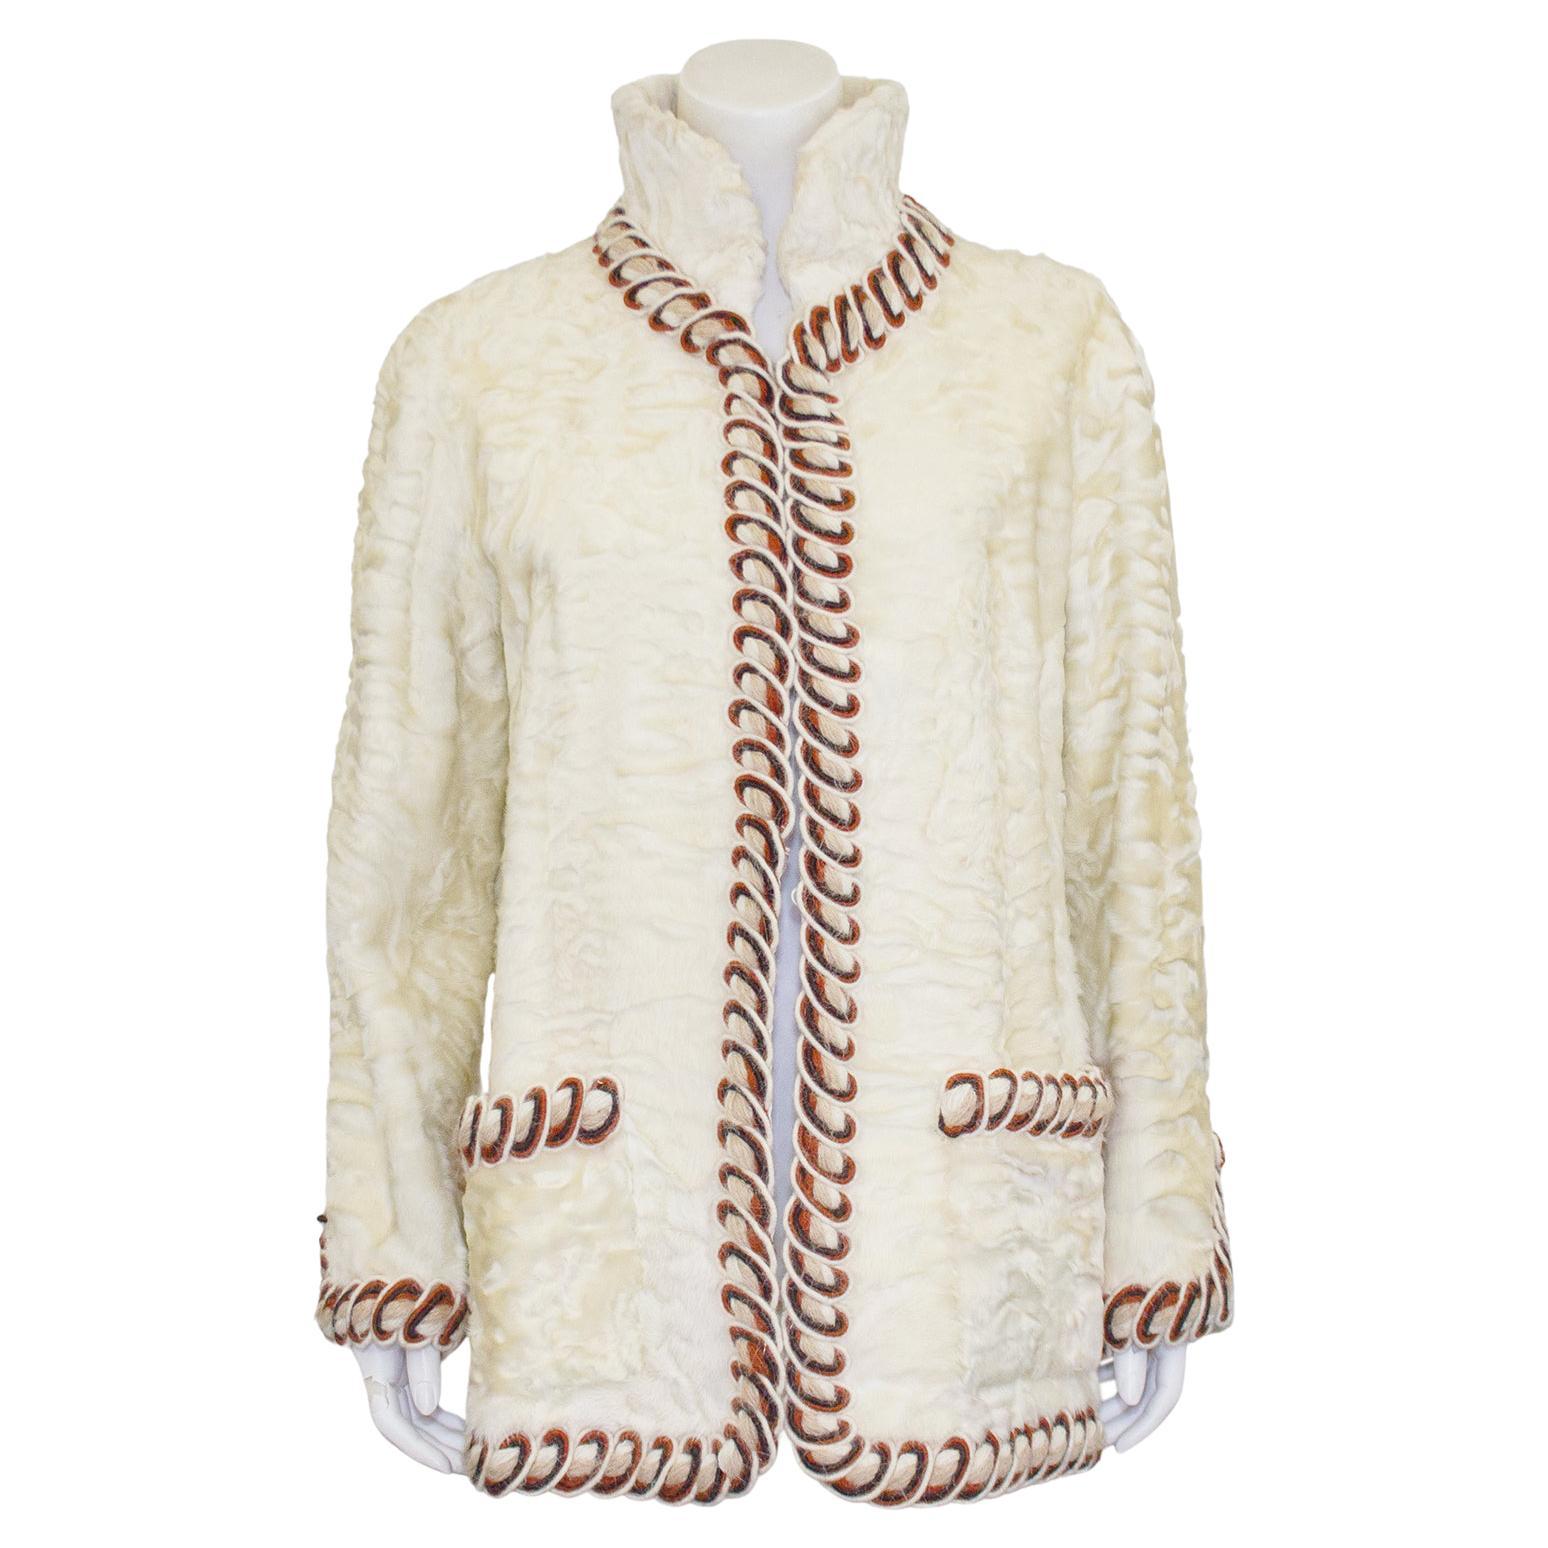 1980s Chanel Haute Couture Cream Broadtail Jacket 